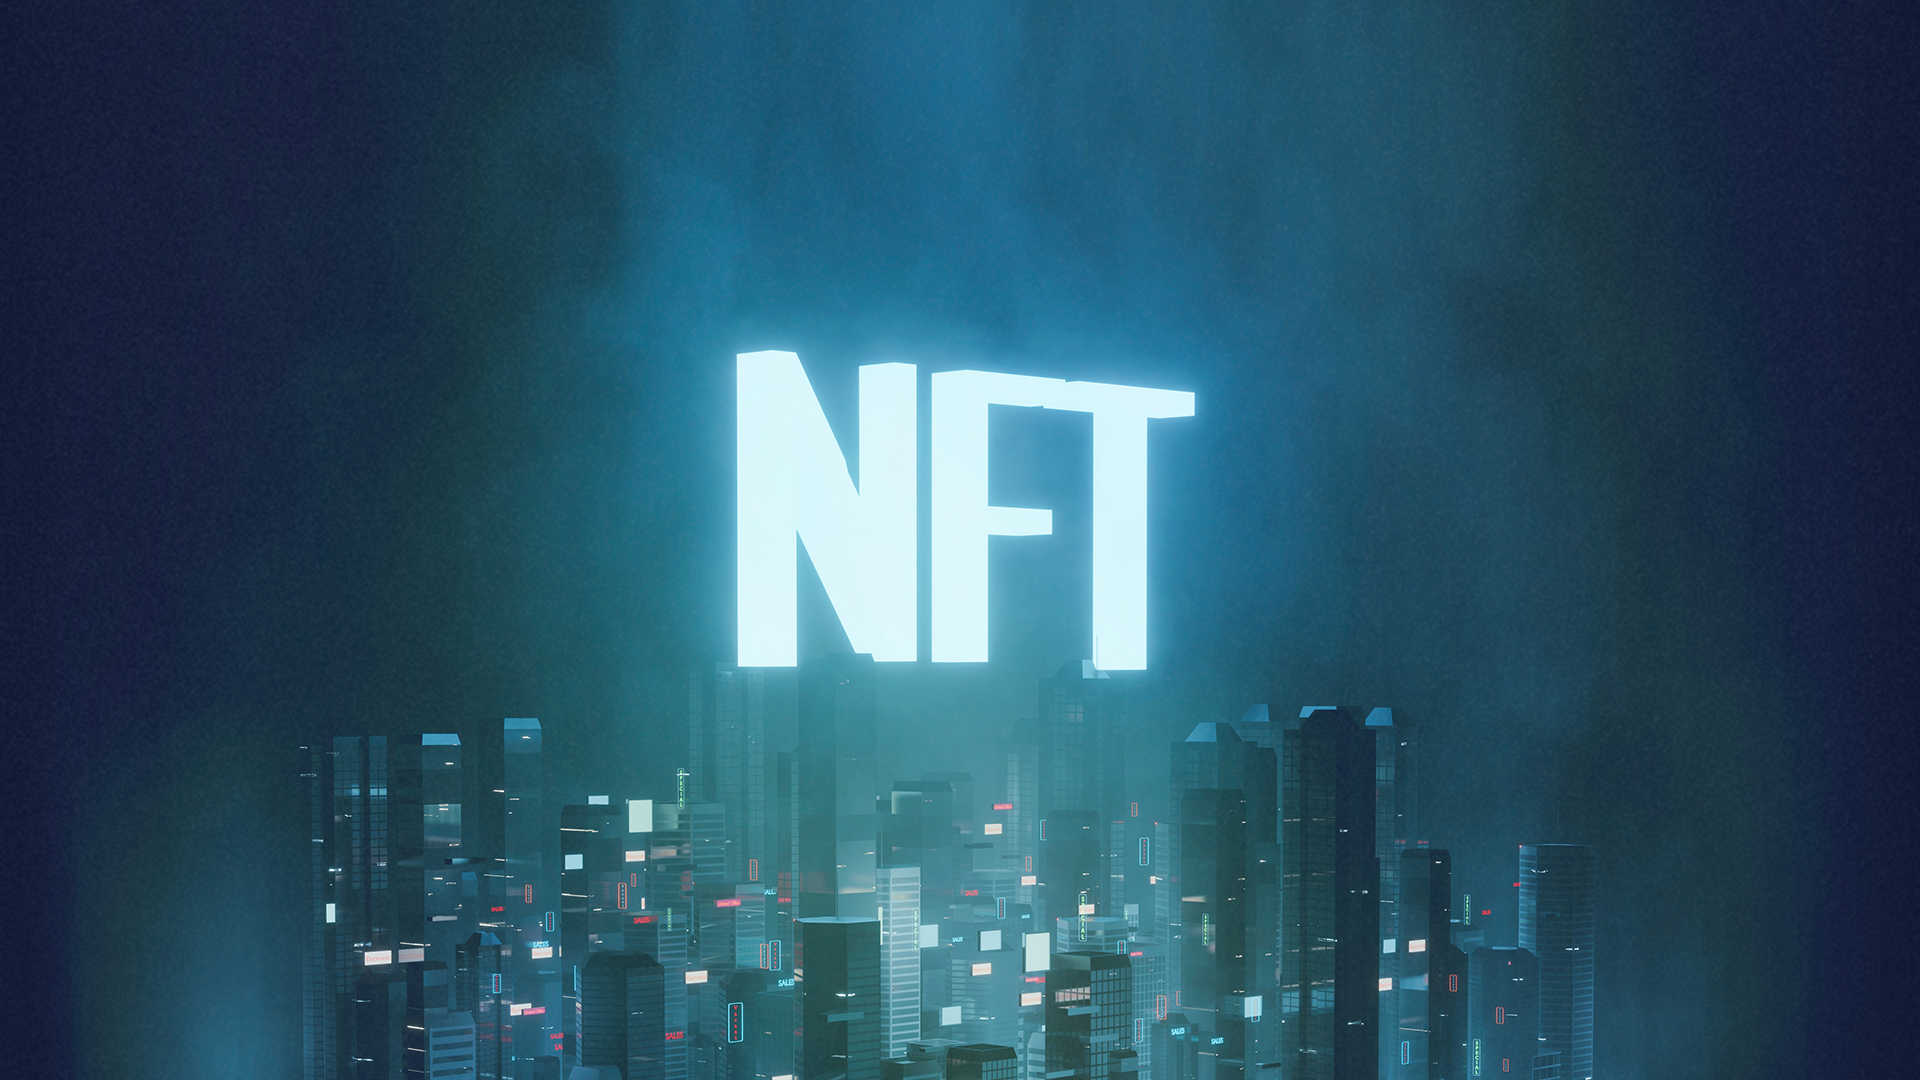 NFT has more potential use cases than we can imagine today